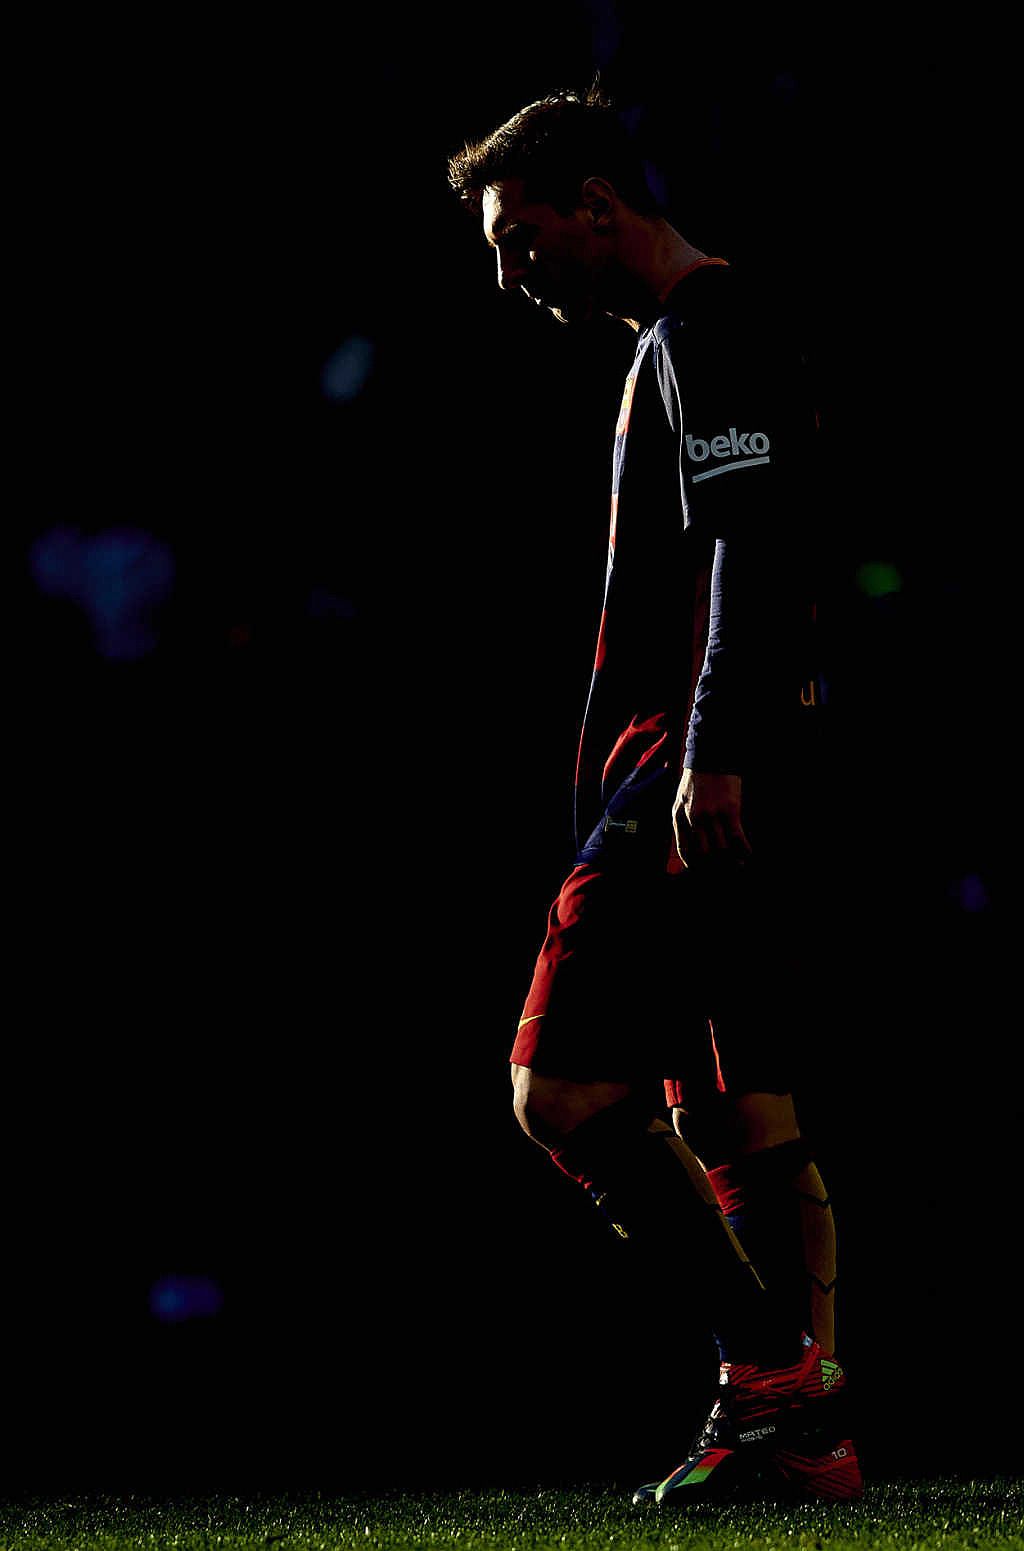 Posting the latest high quality football picture, like or reblog the posts if you enjoy them. Credit goes to. Lionel messi, Lionel messi wallpaper, Messi photo